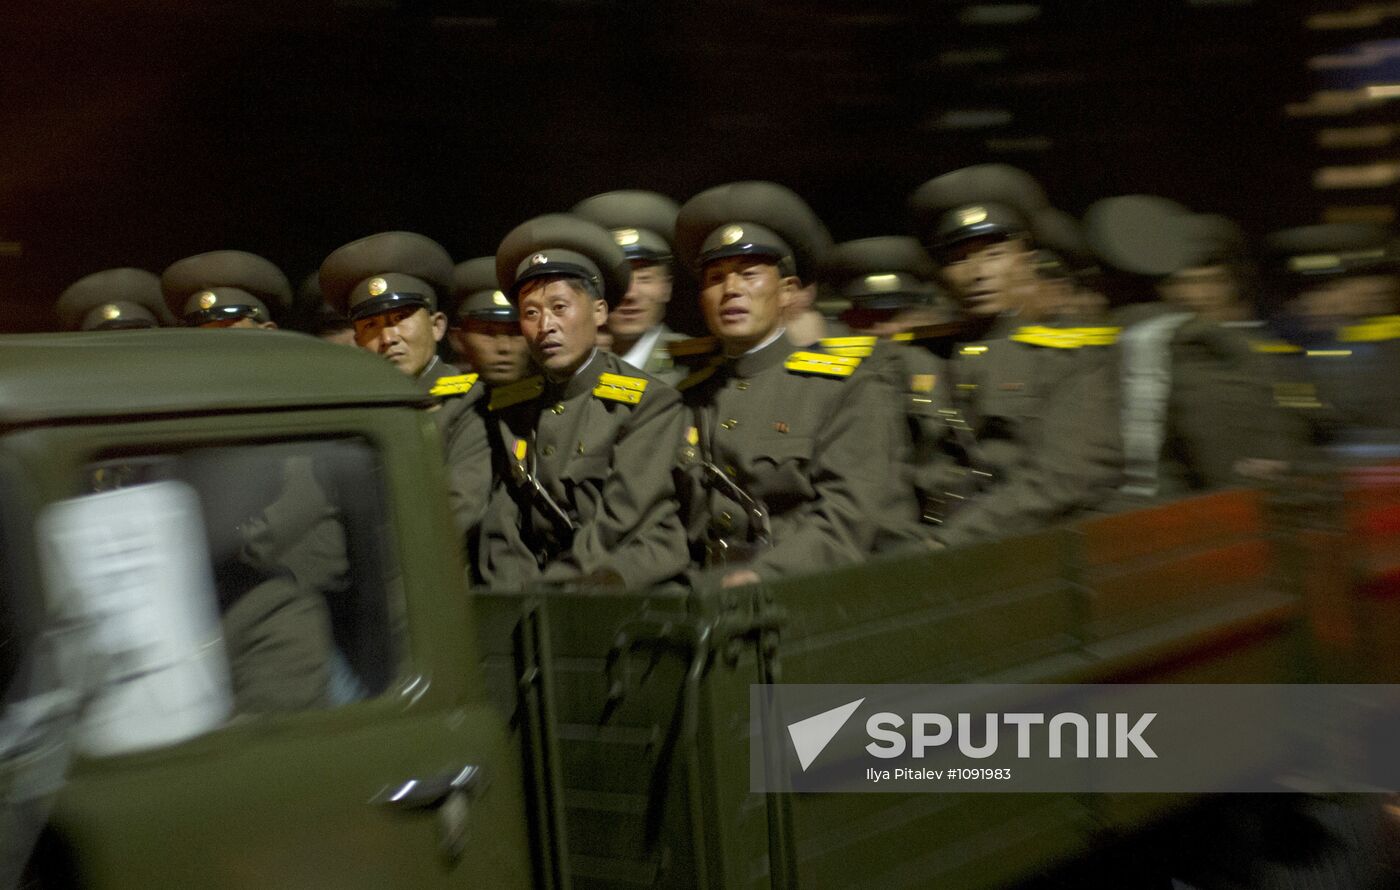 North Korea founder Kim Il Sung's centenary in Pyongyang